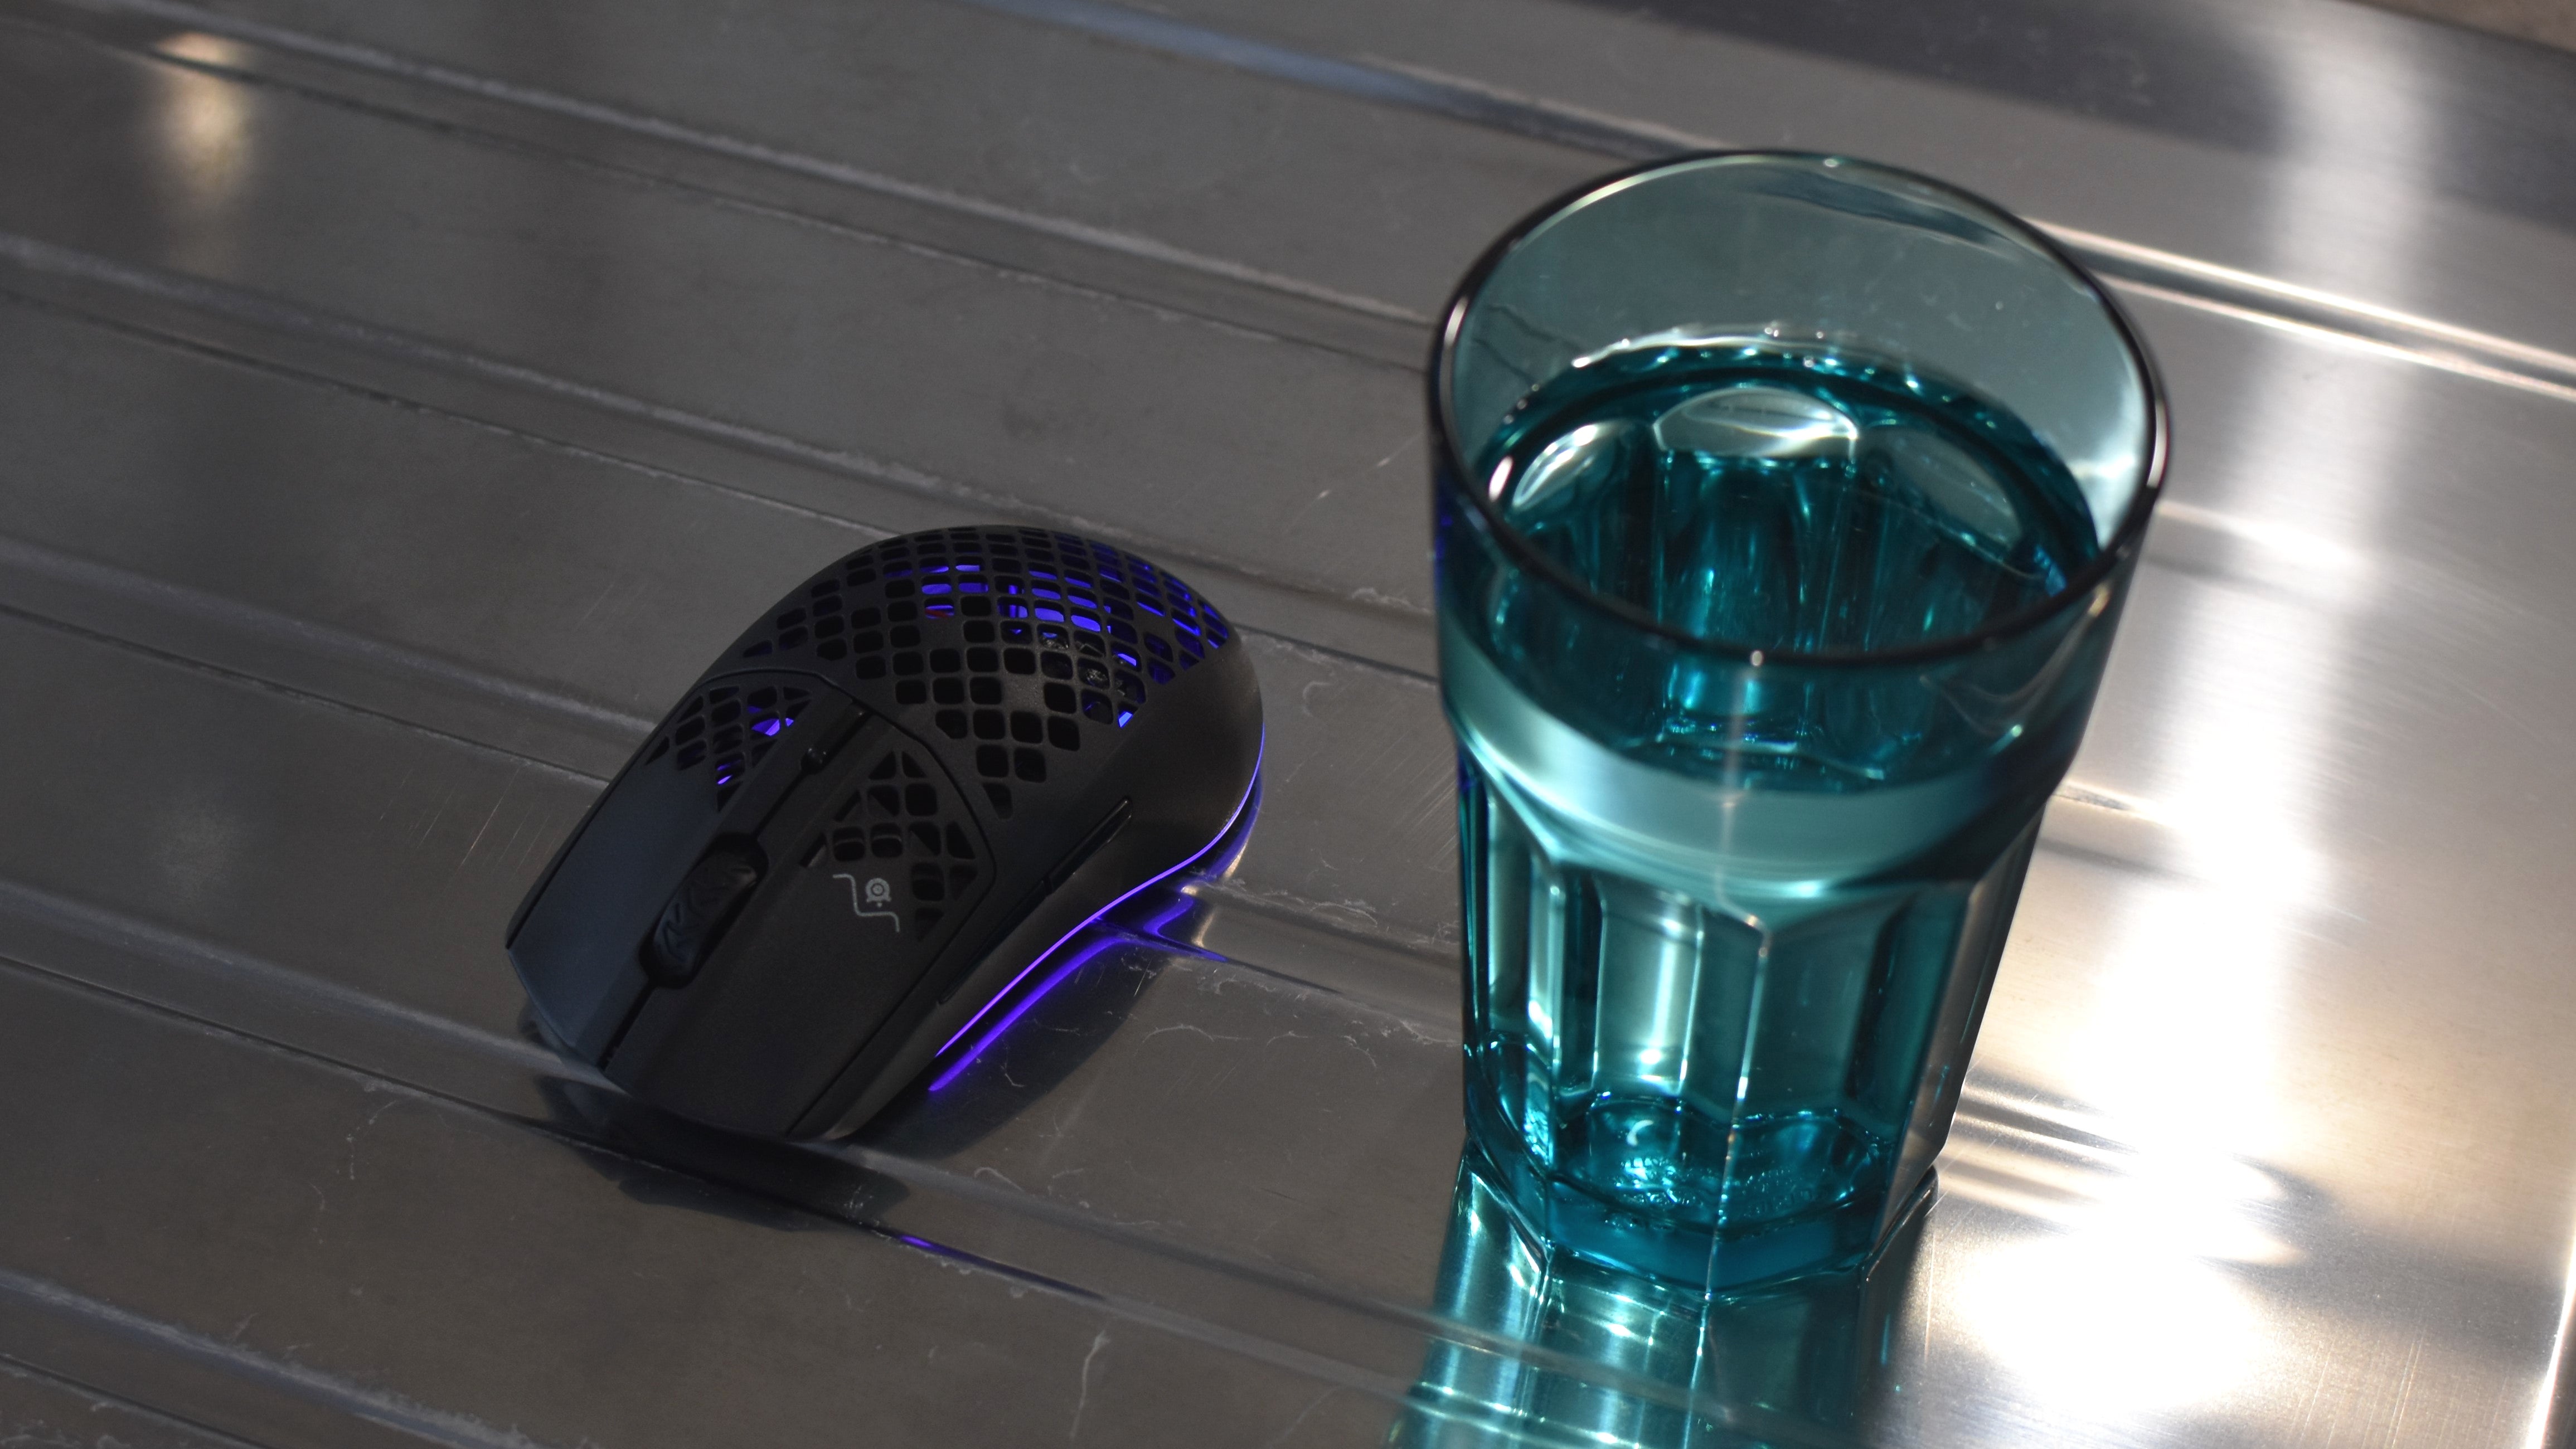 A SteelSeries Aerox 3 Wireless mouse sat next to a glass of water.